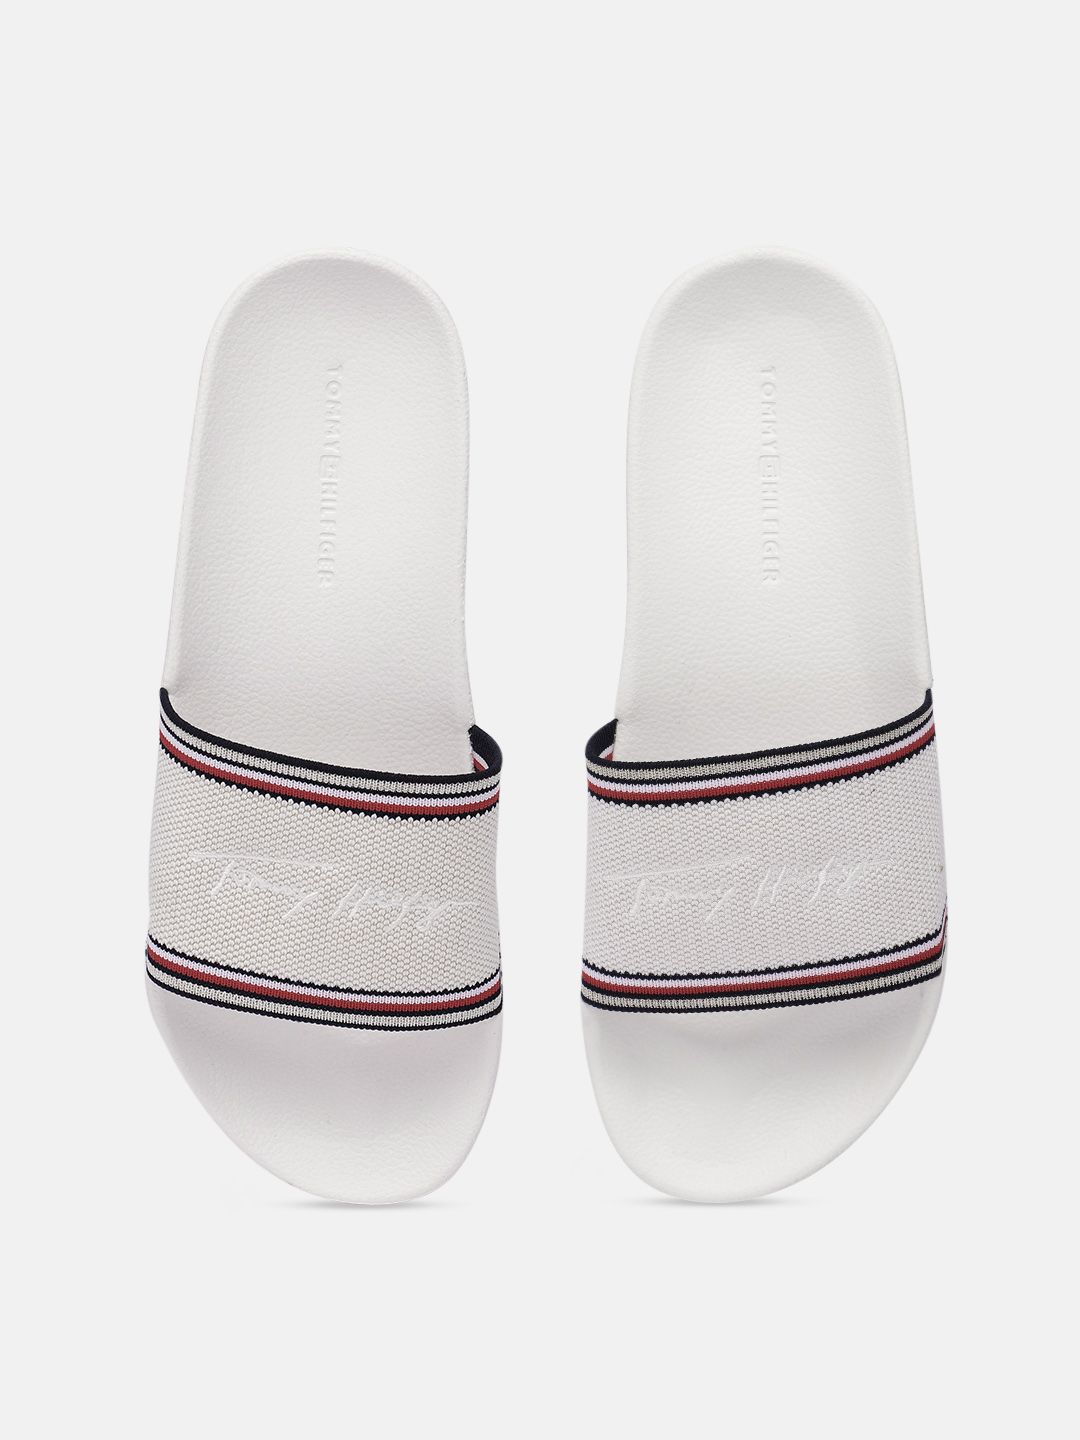 Tommy Hilfiger Women Off White Embroidered Sliders Price in India